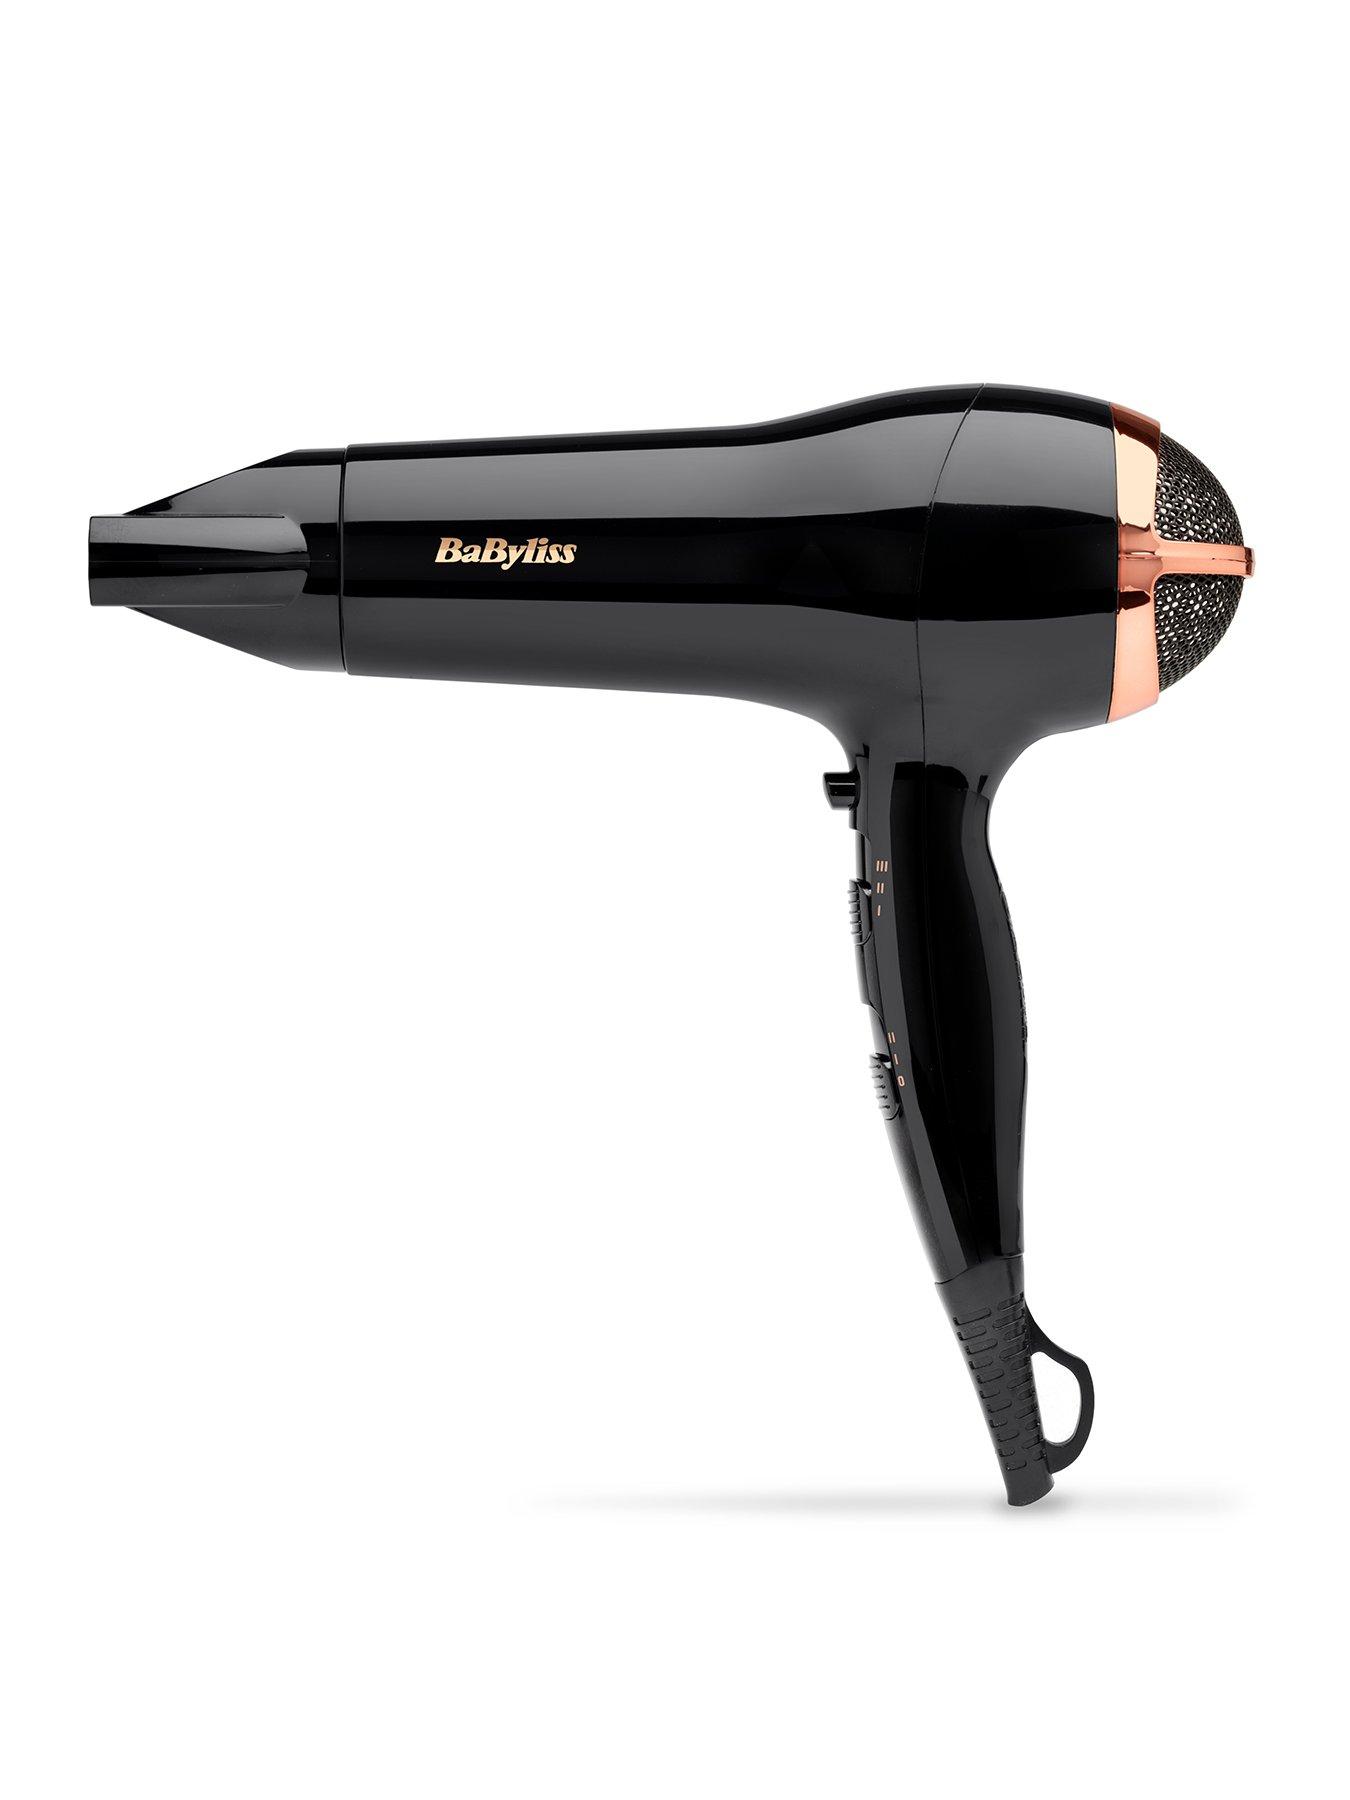 Black and Decker 2000W Hair Dryer Review